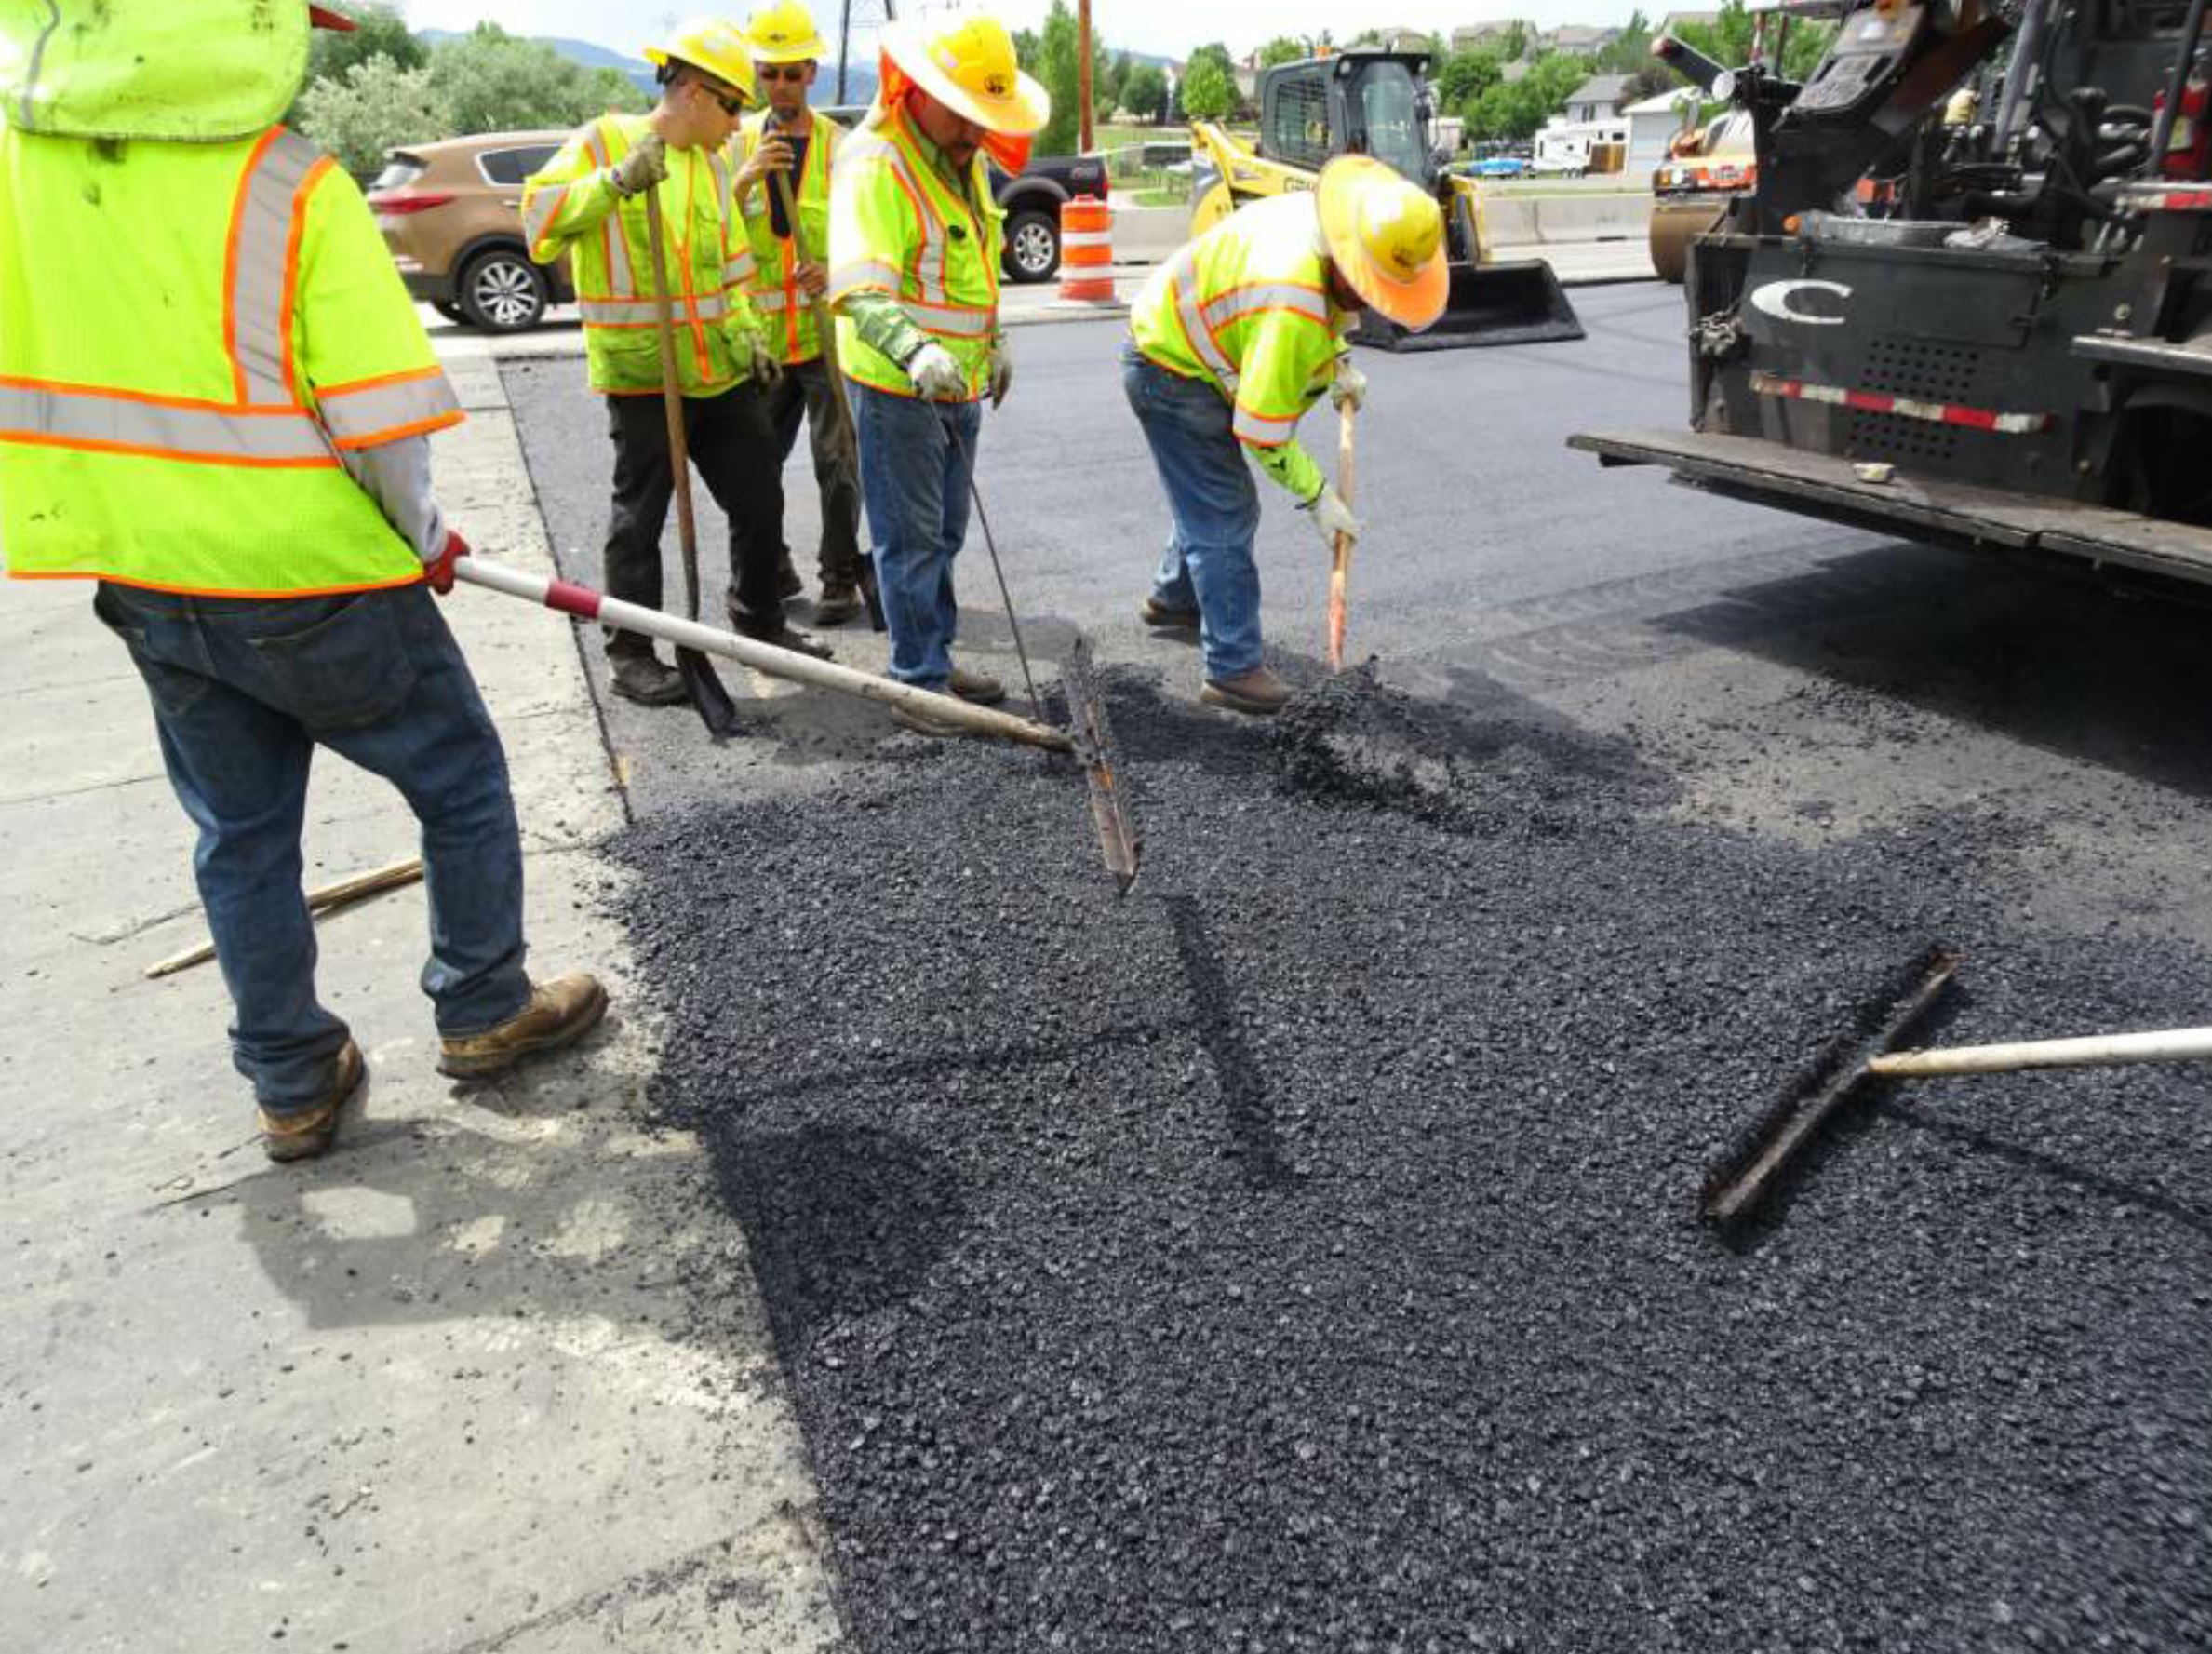 Best Practices of Residential and Commercial Paving | AsphaltPro Magazine |  Paving Perfect Residential and Commercial Jobs